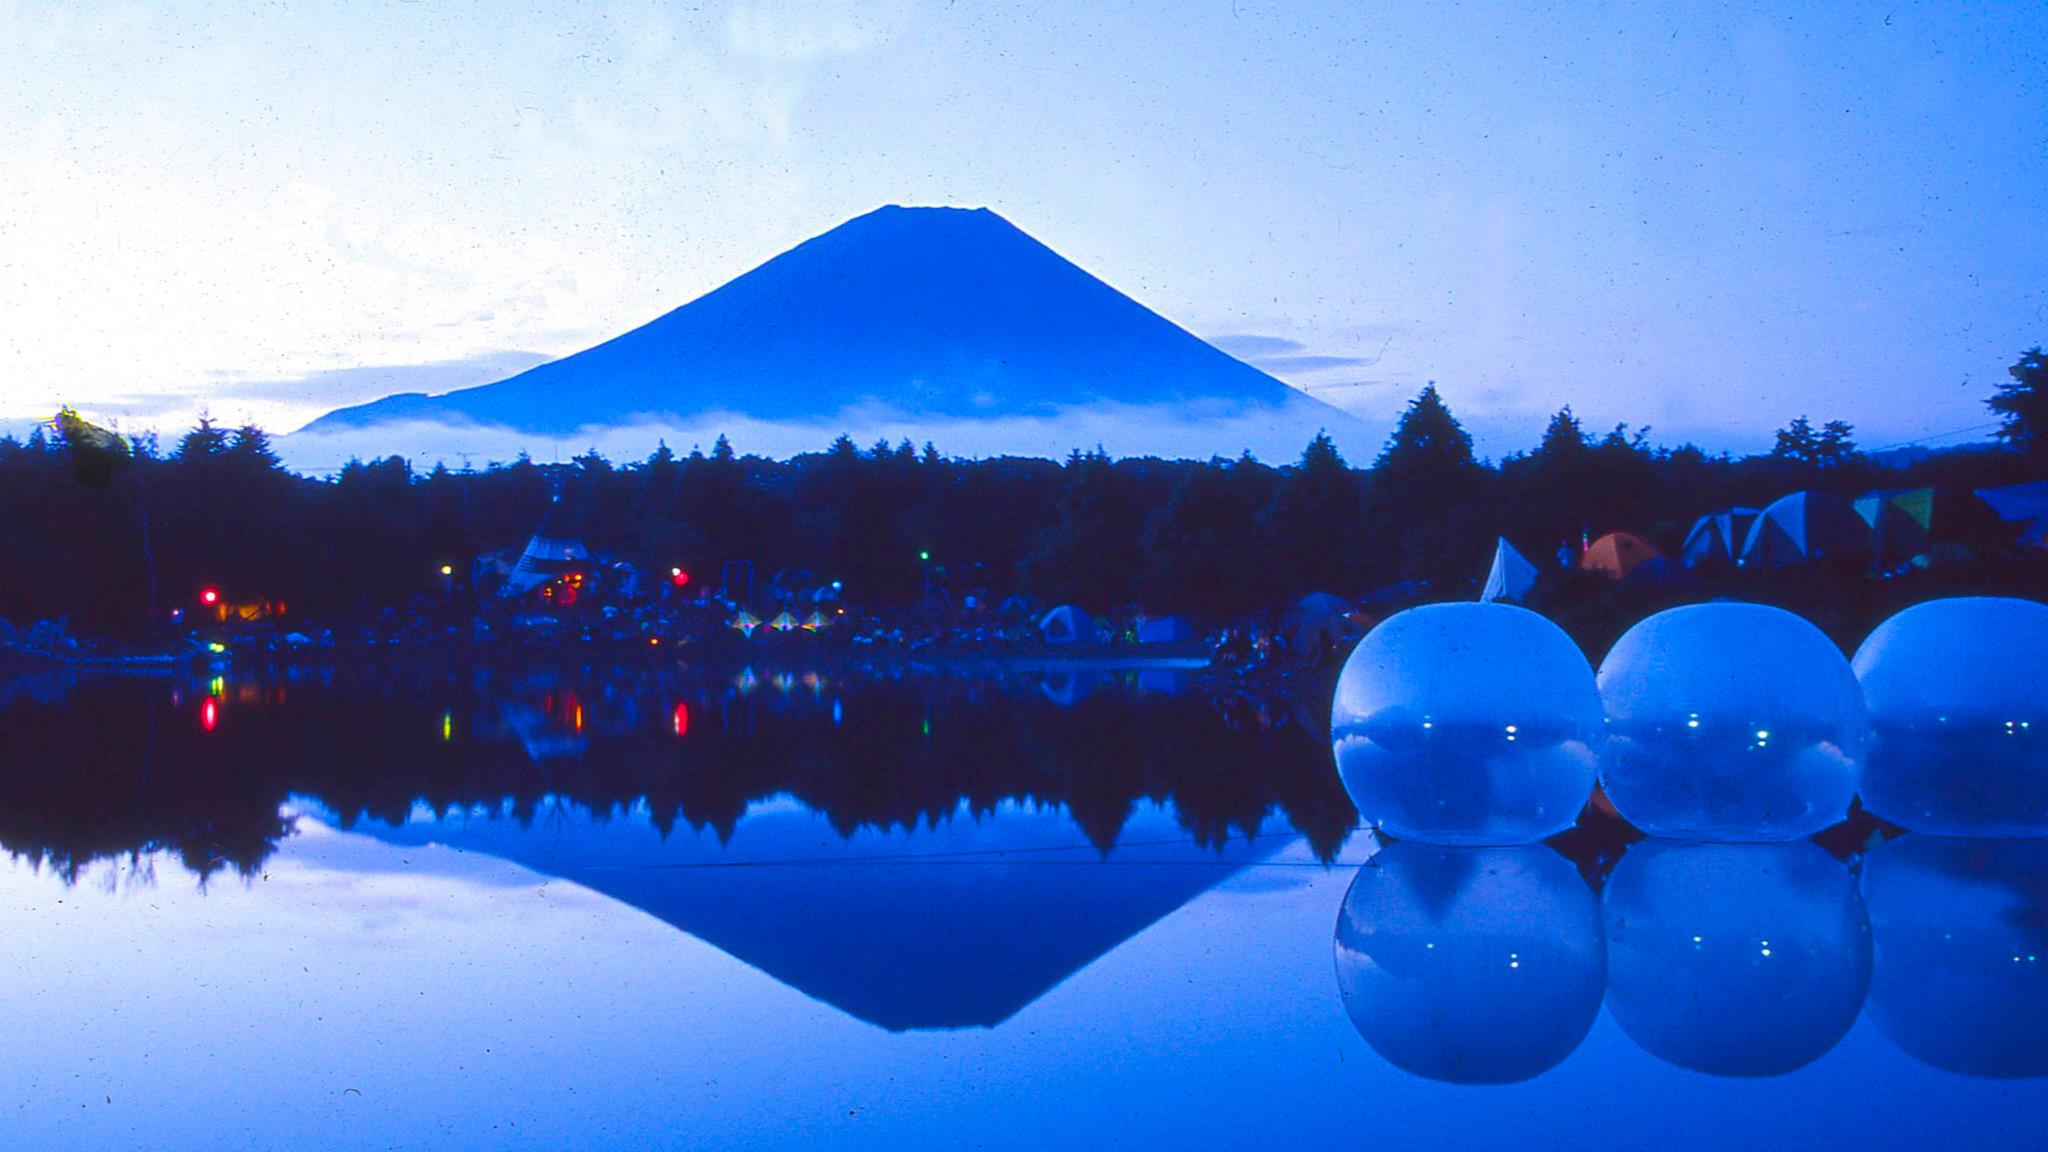 “SOLSTICE MUSIC FESTIVAL” (2001) at Motosu Highland, Yamanashi Prefecture
“SOLSTICE MUSIC MUSIC” was held at Motosu Highland in 2001. The person I want you to pay attention to is Masaru Morita, who led a VJ team called M.M. Delight. He passed away in 2008, but he was one of the leading figures of outdoor parties in Japan and later established the Nagisa Music Festival and other notable events. Morita-san projected the moving images on round balls floating on the lake” (Kotaro)
Photography Kotaro Manabe